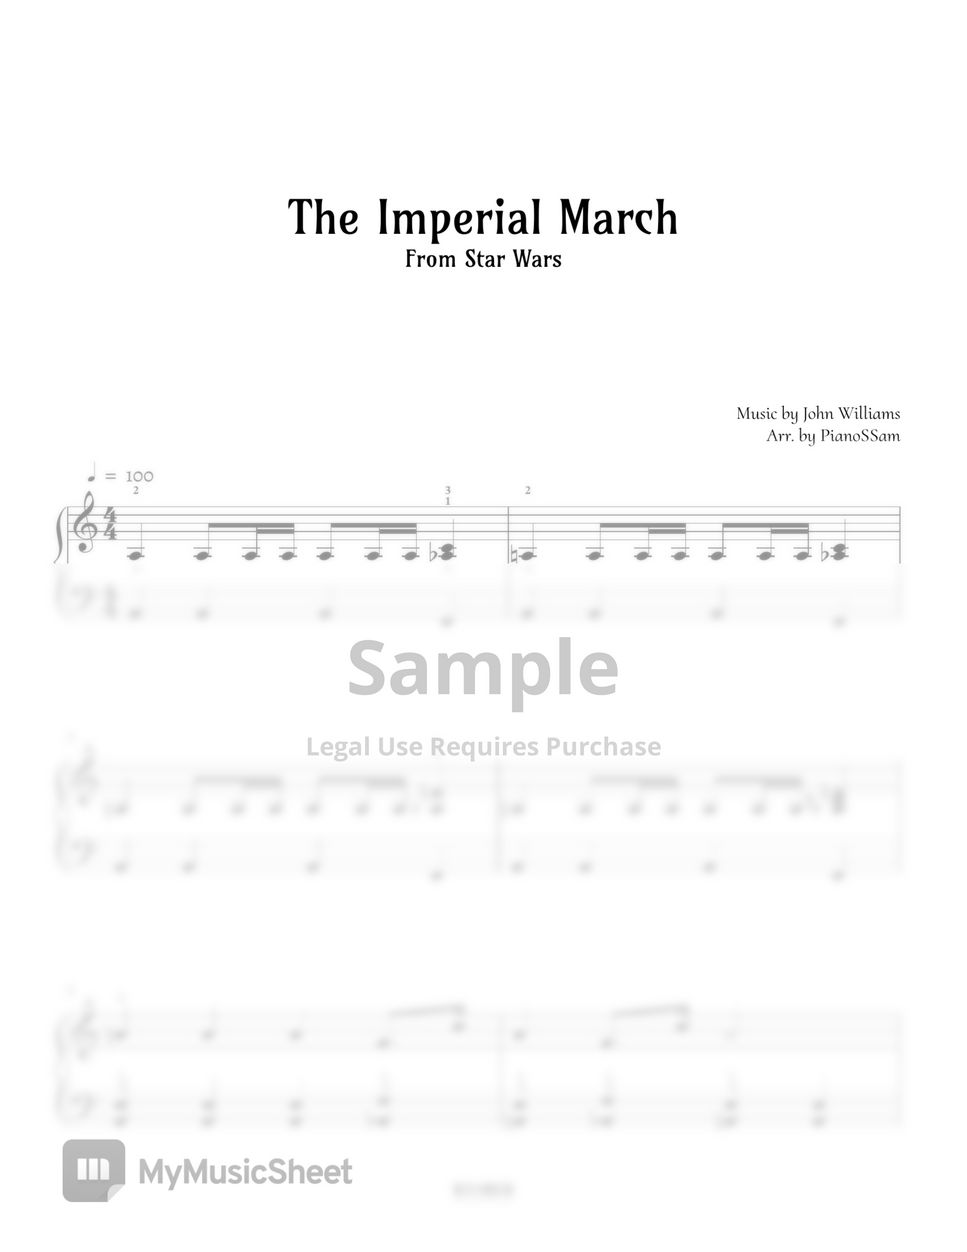 John Williams - Imperial March (Star Wars) by PianoSSam